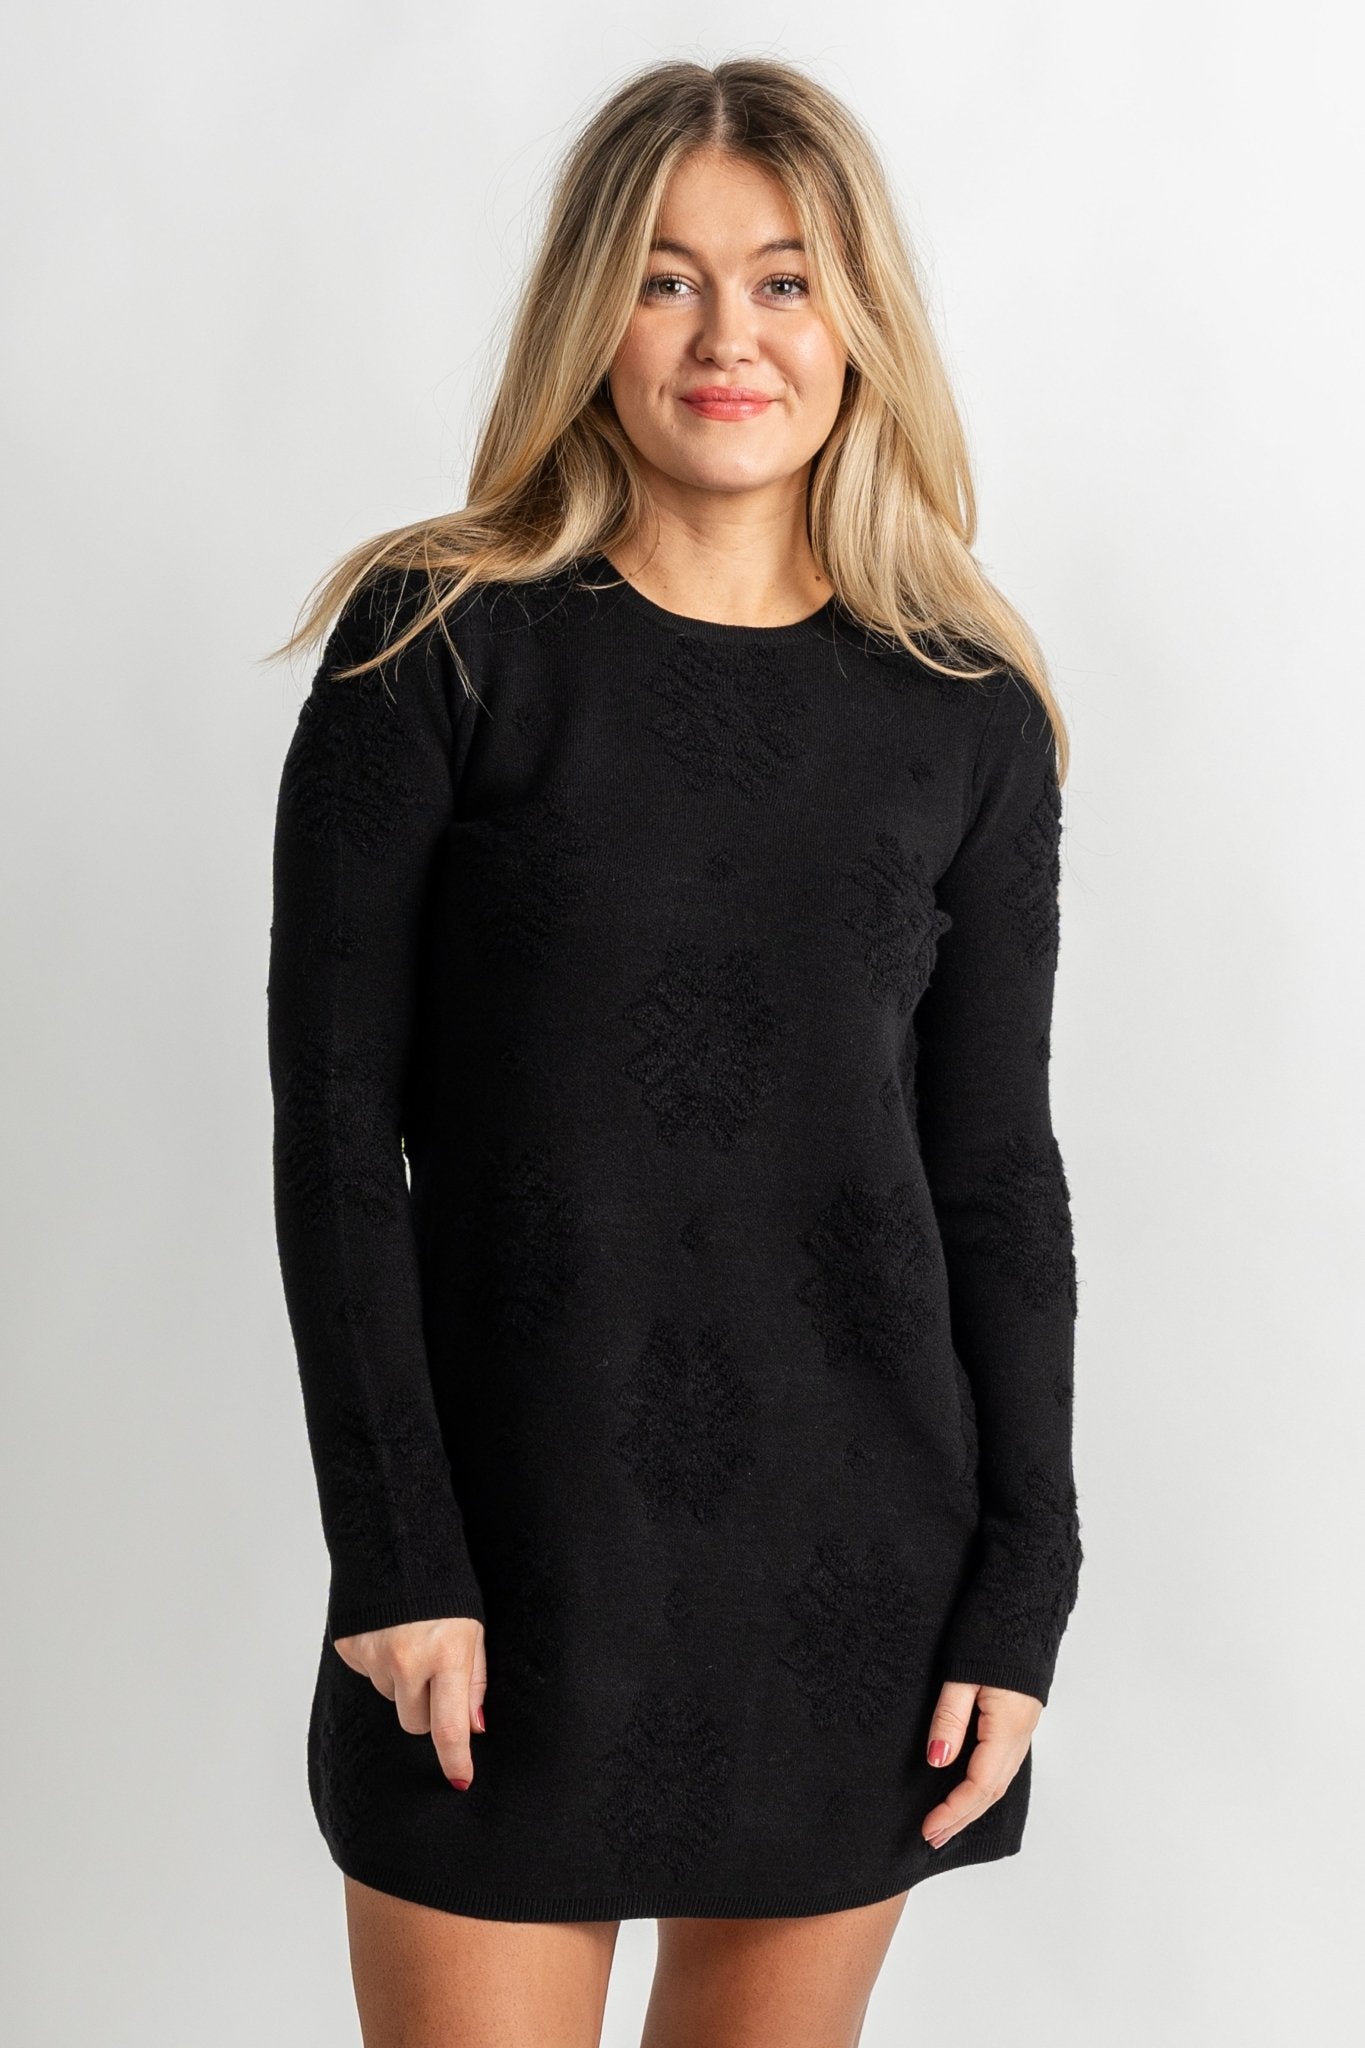 Z Supply Lena sweater dress black - Affordable dress - Boutique Dresses at Lush Fashion Lounge Boutique in Oklahoma City